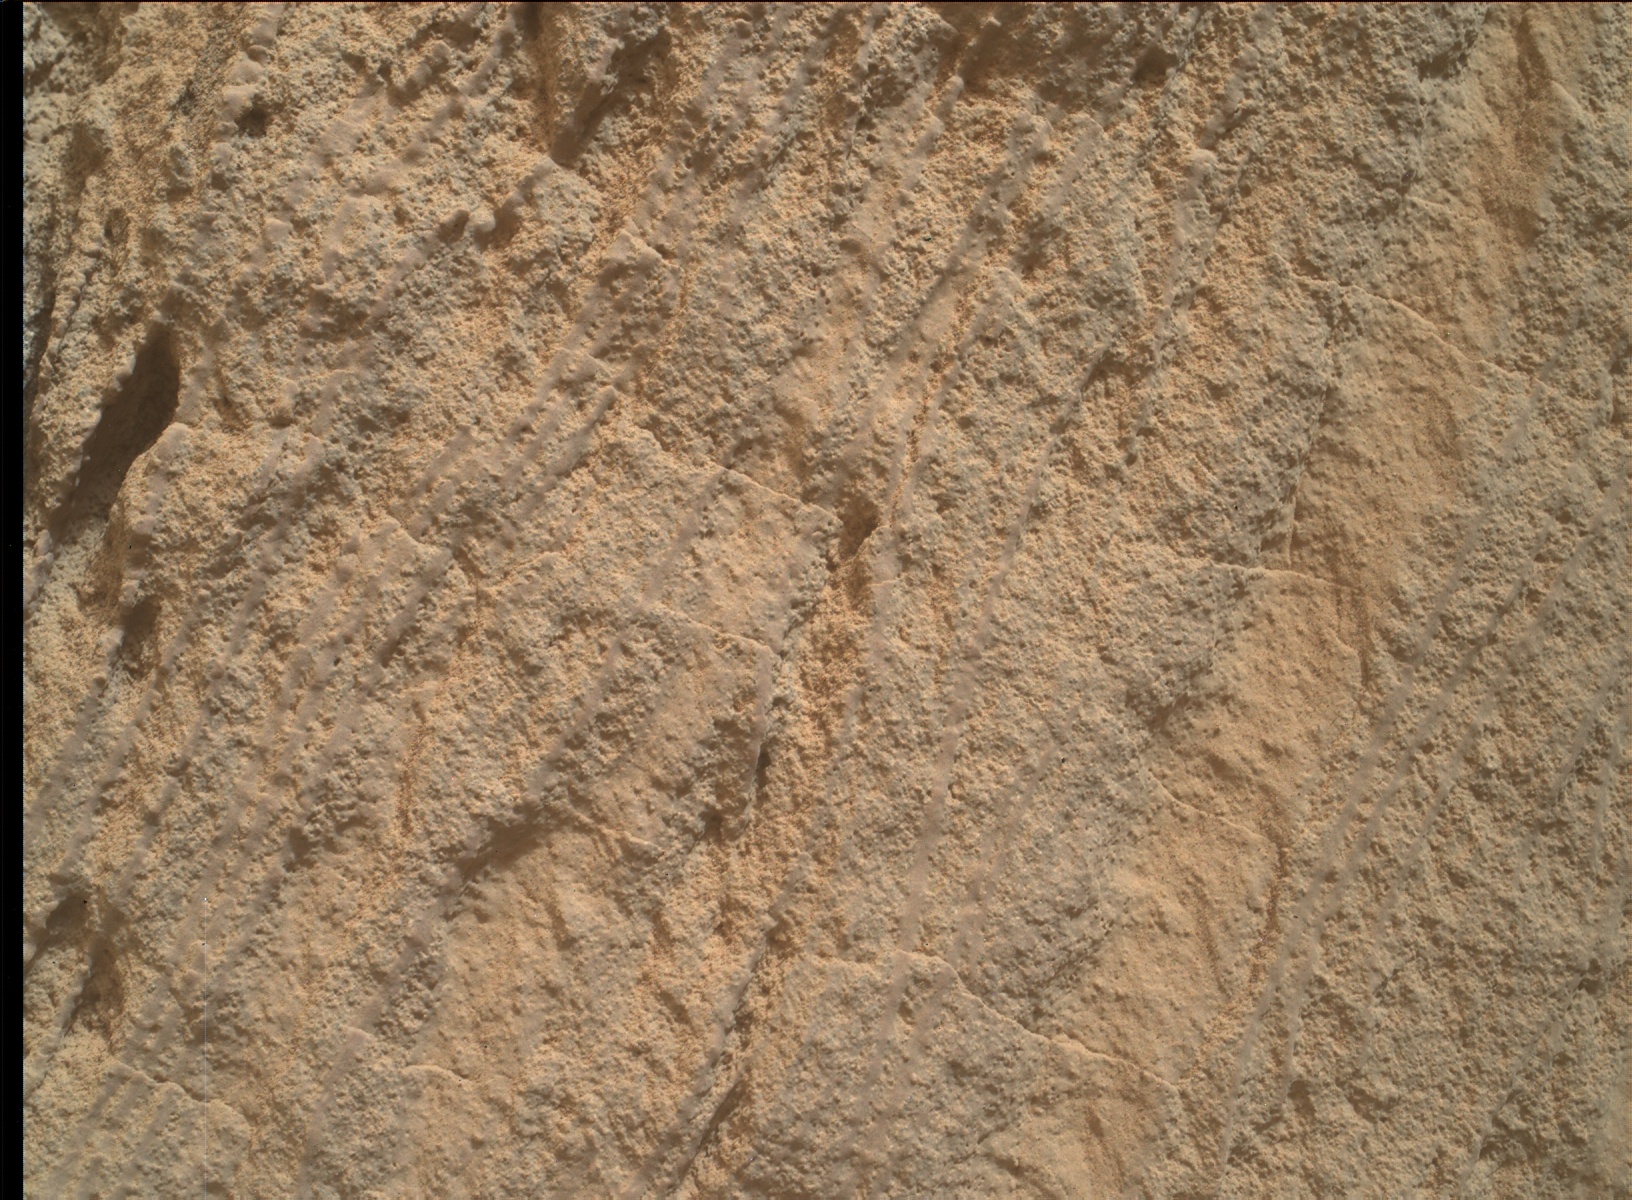 Nasa's Mars rover Curiosity acquired this image using its Mars Hand Lens Imager (MAHLI) on Sol 3374